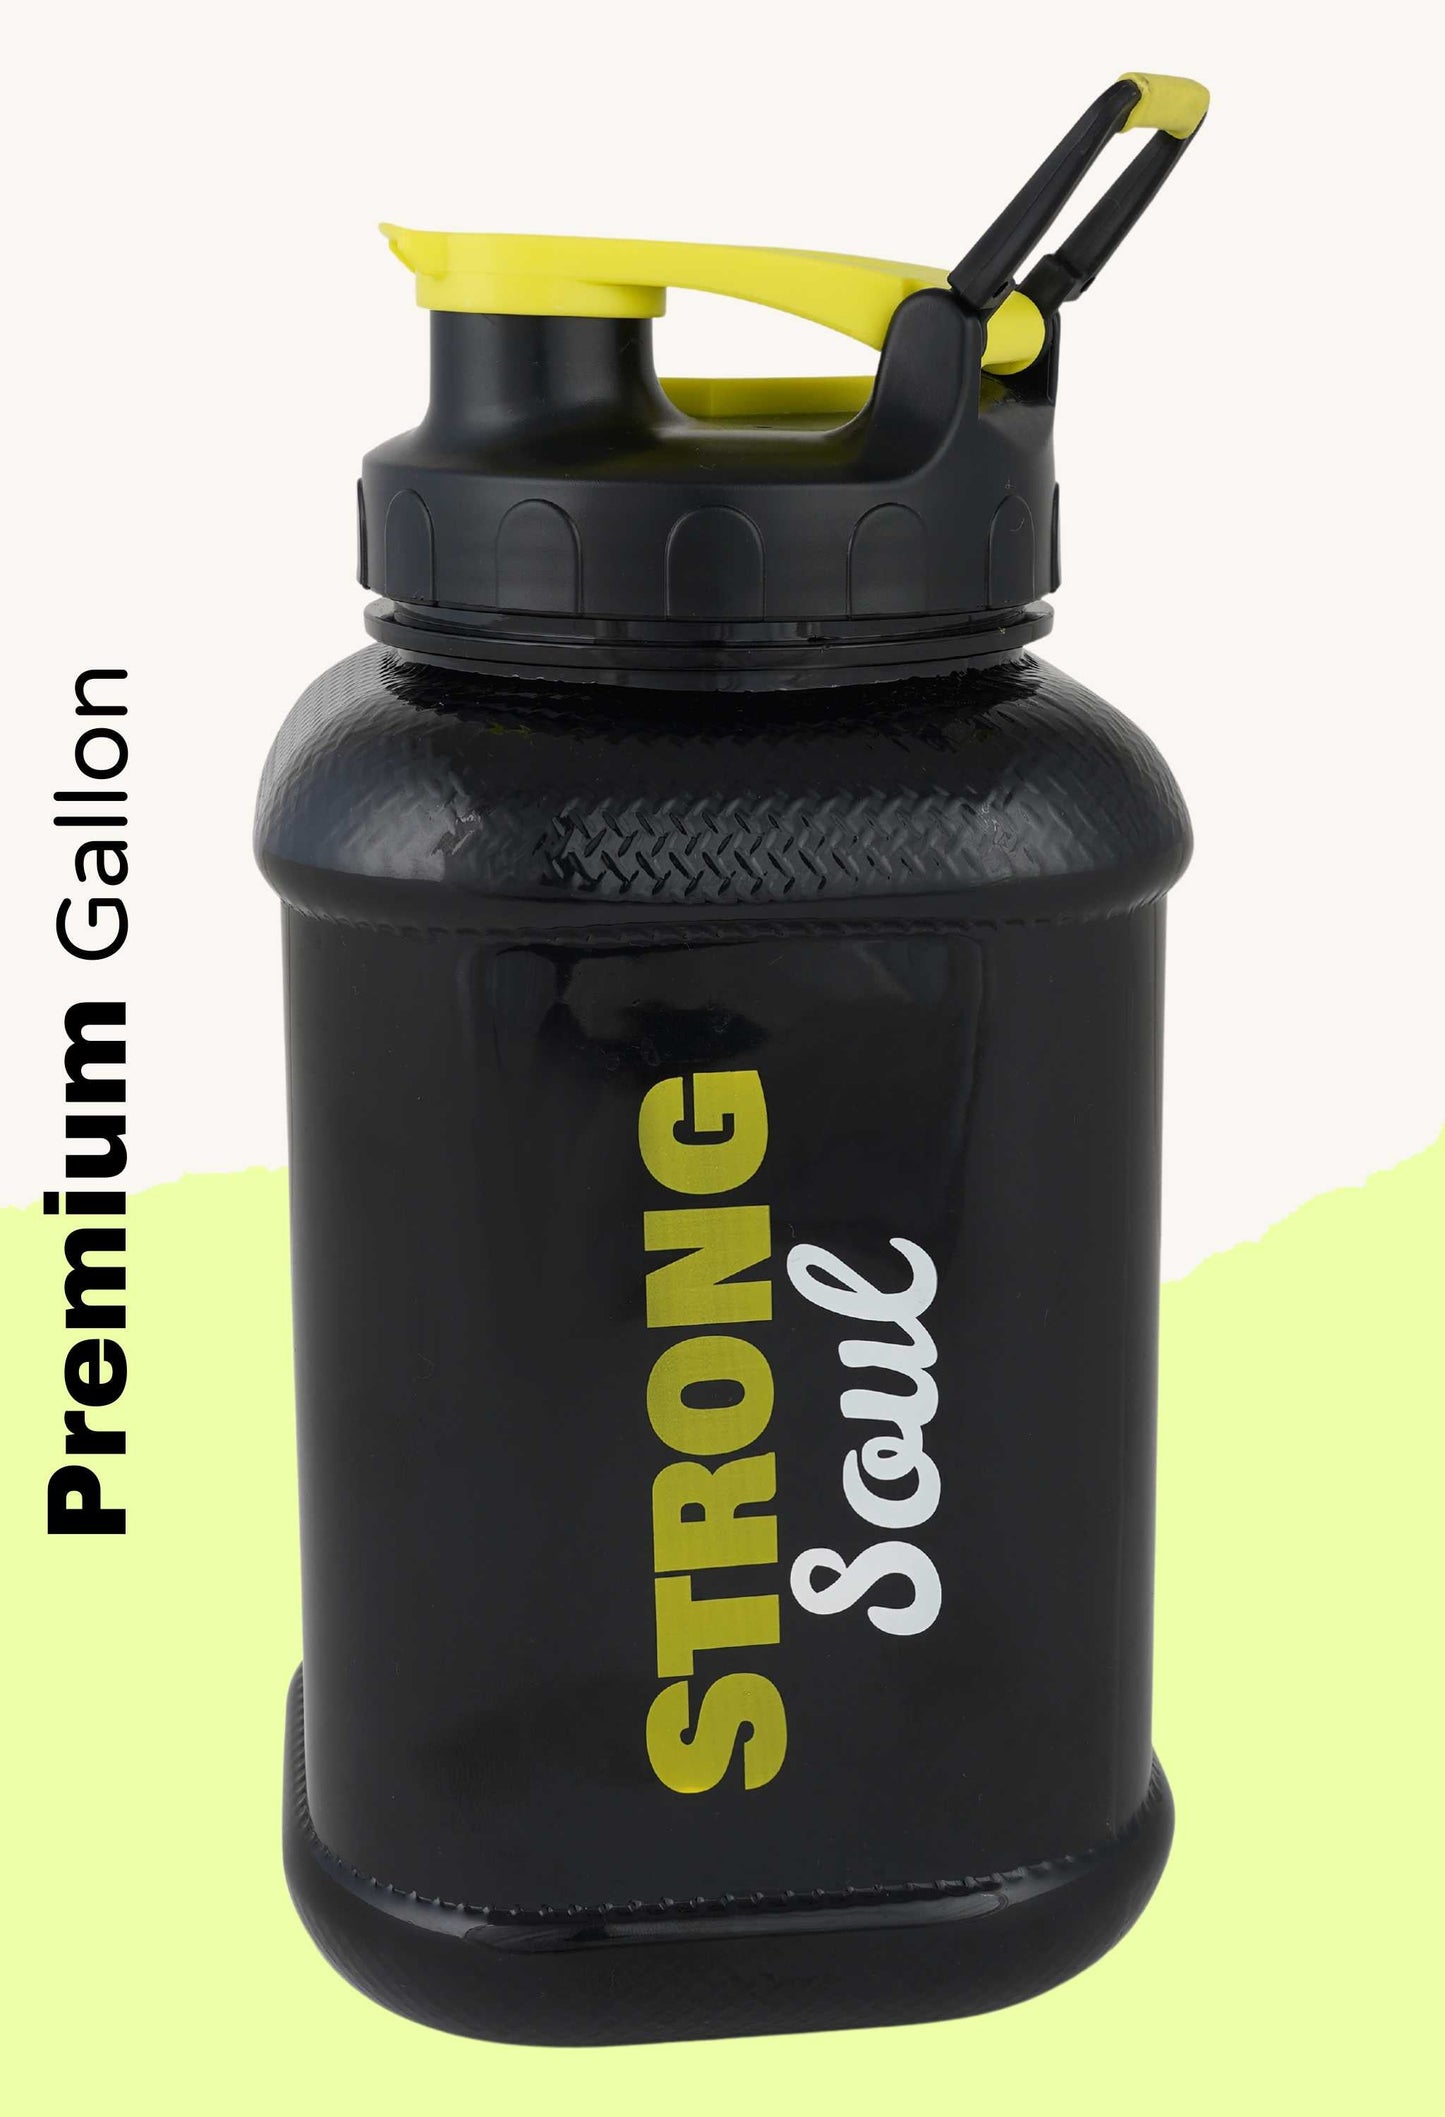 Pain is temporary - Monster Gallon Gym Bottle 2.2L Strong Soul Gym Bottle